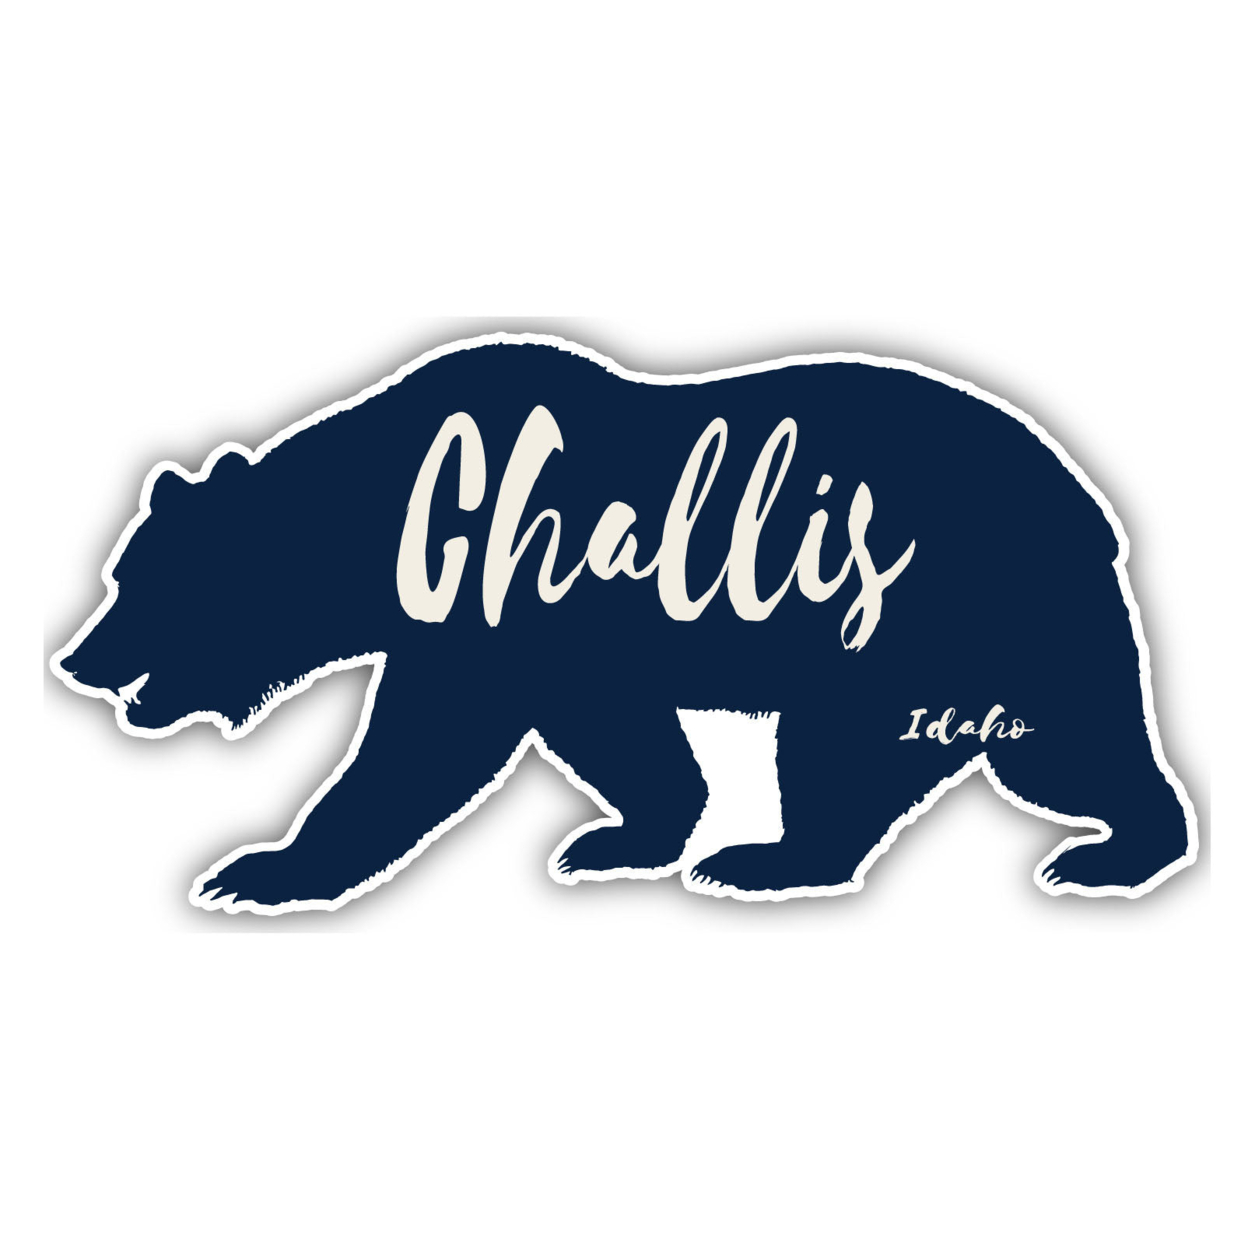 Challis Idaho Souvenir Decorative Stickers (Choose Theme And Size) - 4-Pack, 6-Inch, Tent